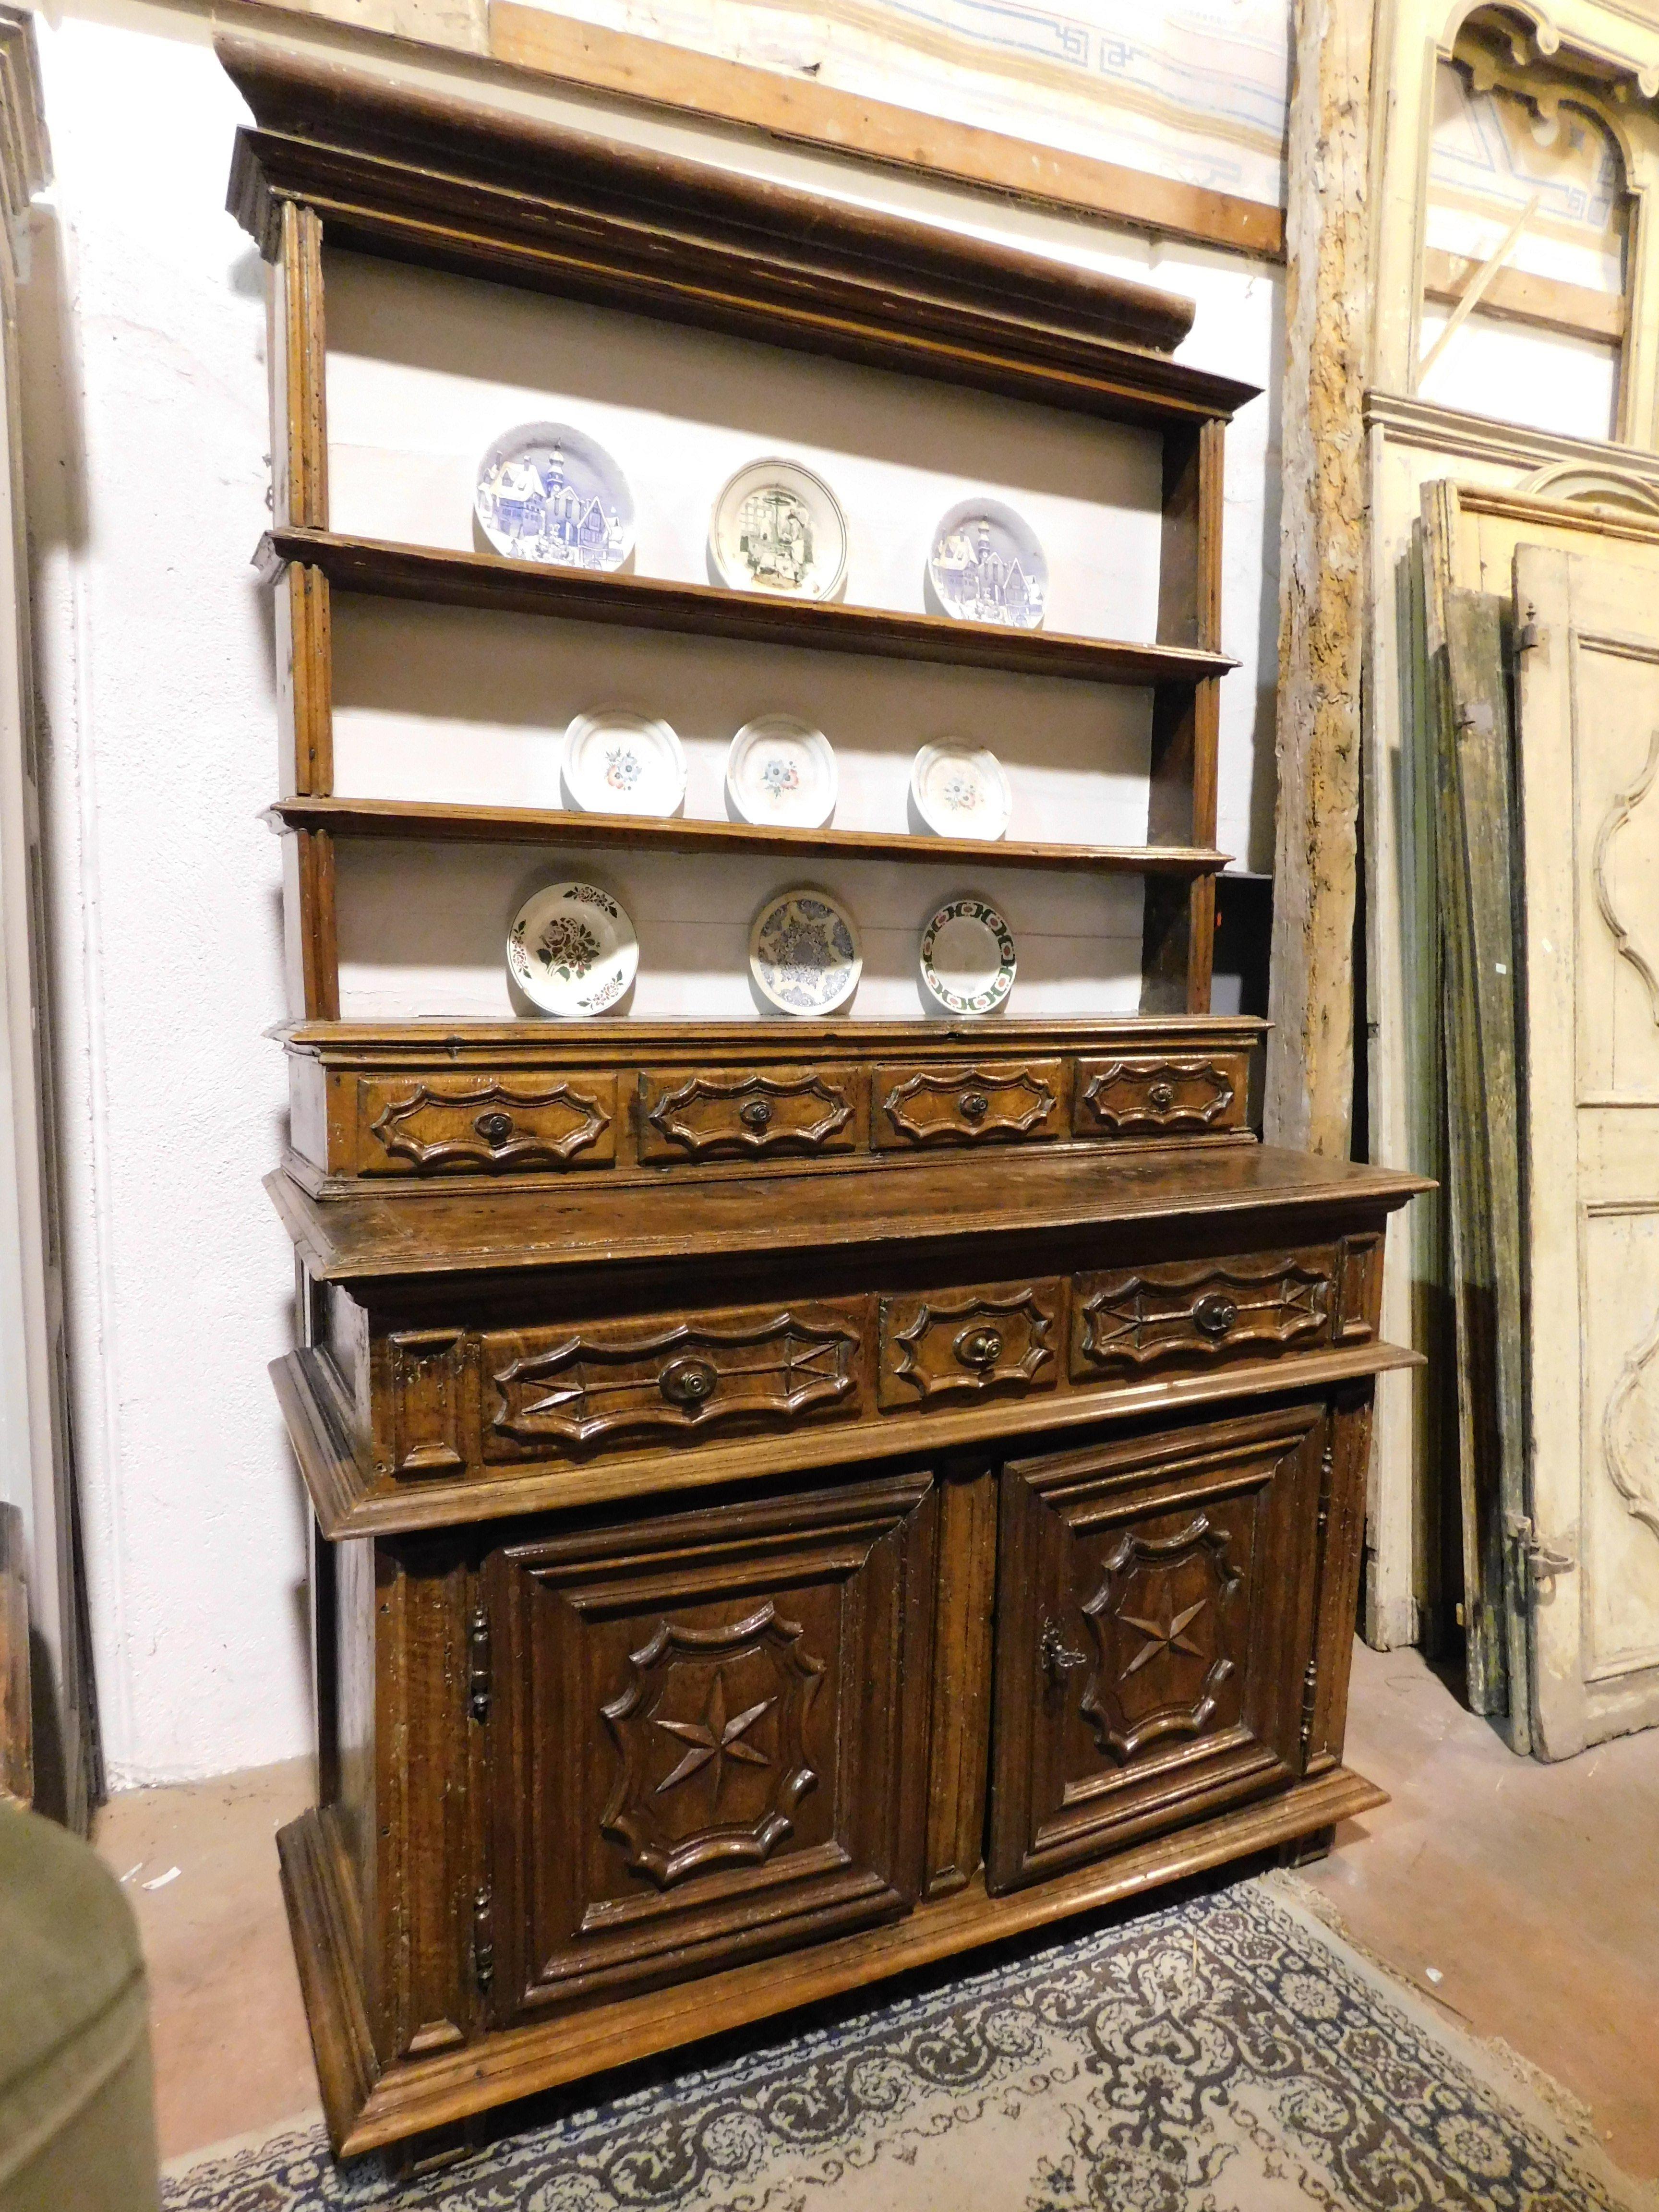 Antique Piattaia piece of furniture, plate holder with drawers and doors, all in richly hand-carved walnut with spider web tiles, from Turin (Italy) from the 19th century, maximum size cm W 165 x H 244 x D 65.
Can be used as a pantry, organizer in